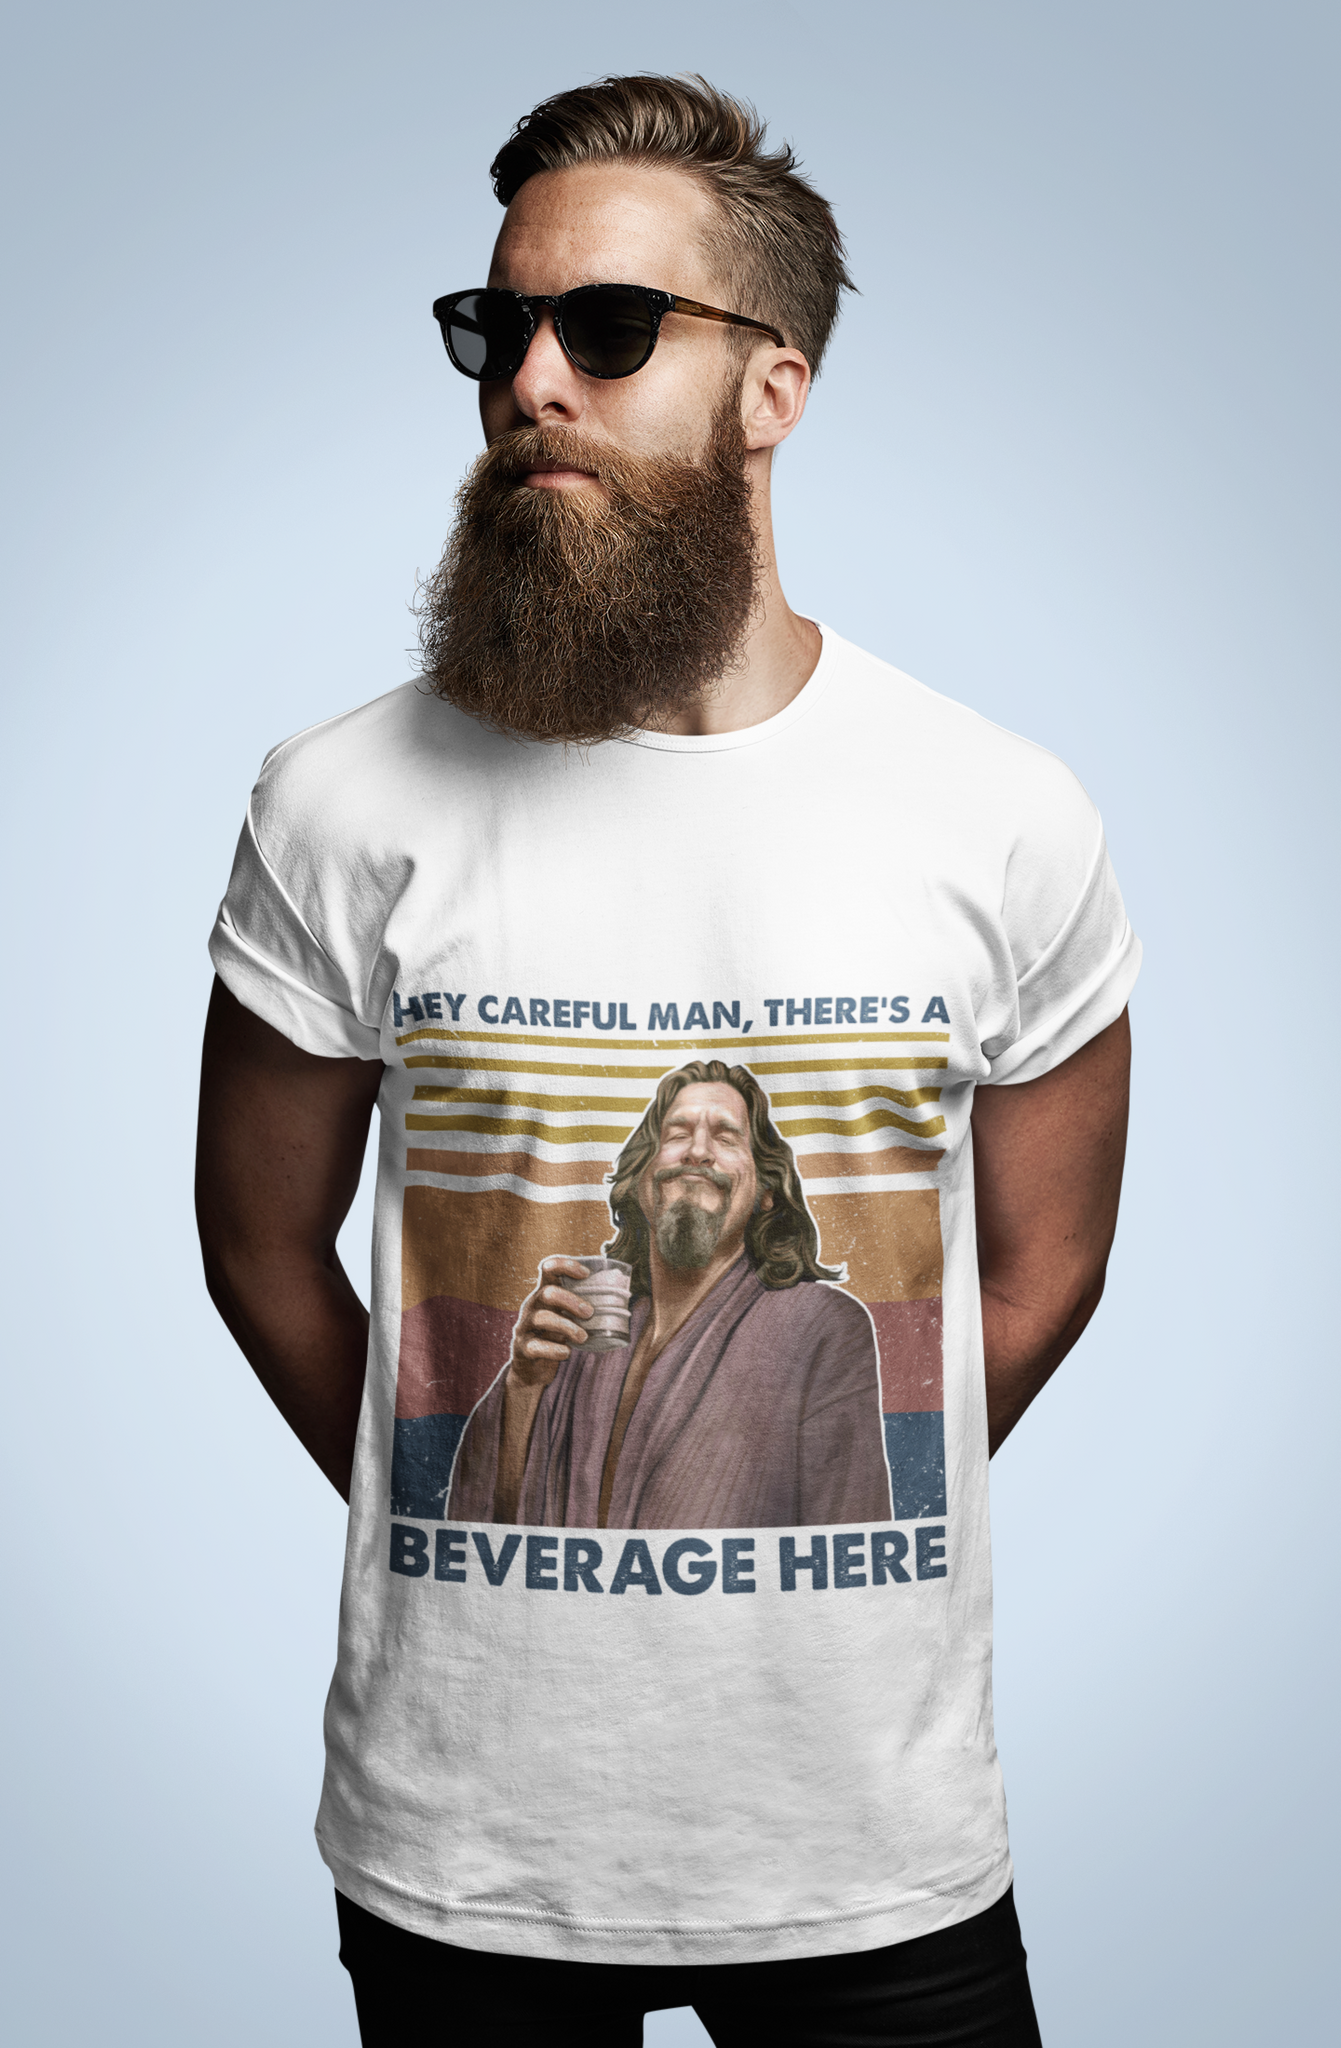 The Big Lebowski Vintage Tshirt, Hey Careful Man Theres A Beverage Here Shirt, The Dude T Shirt